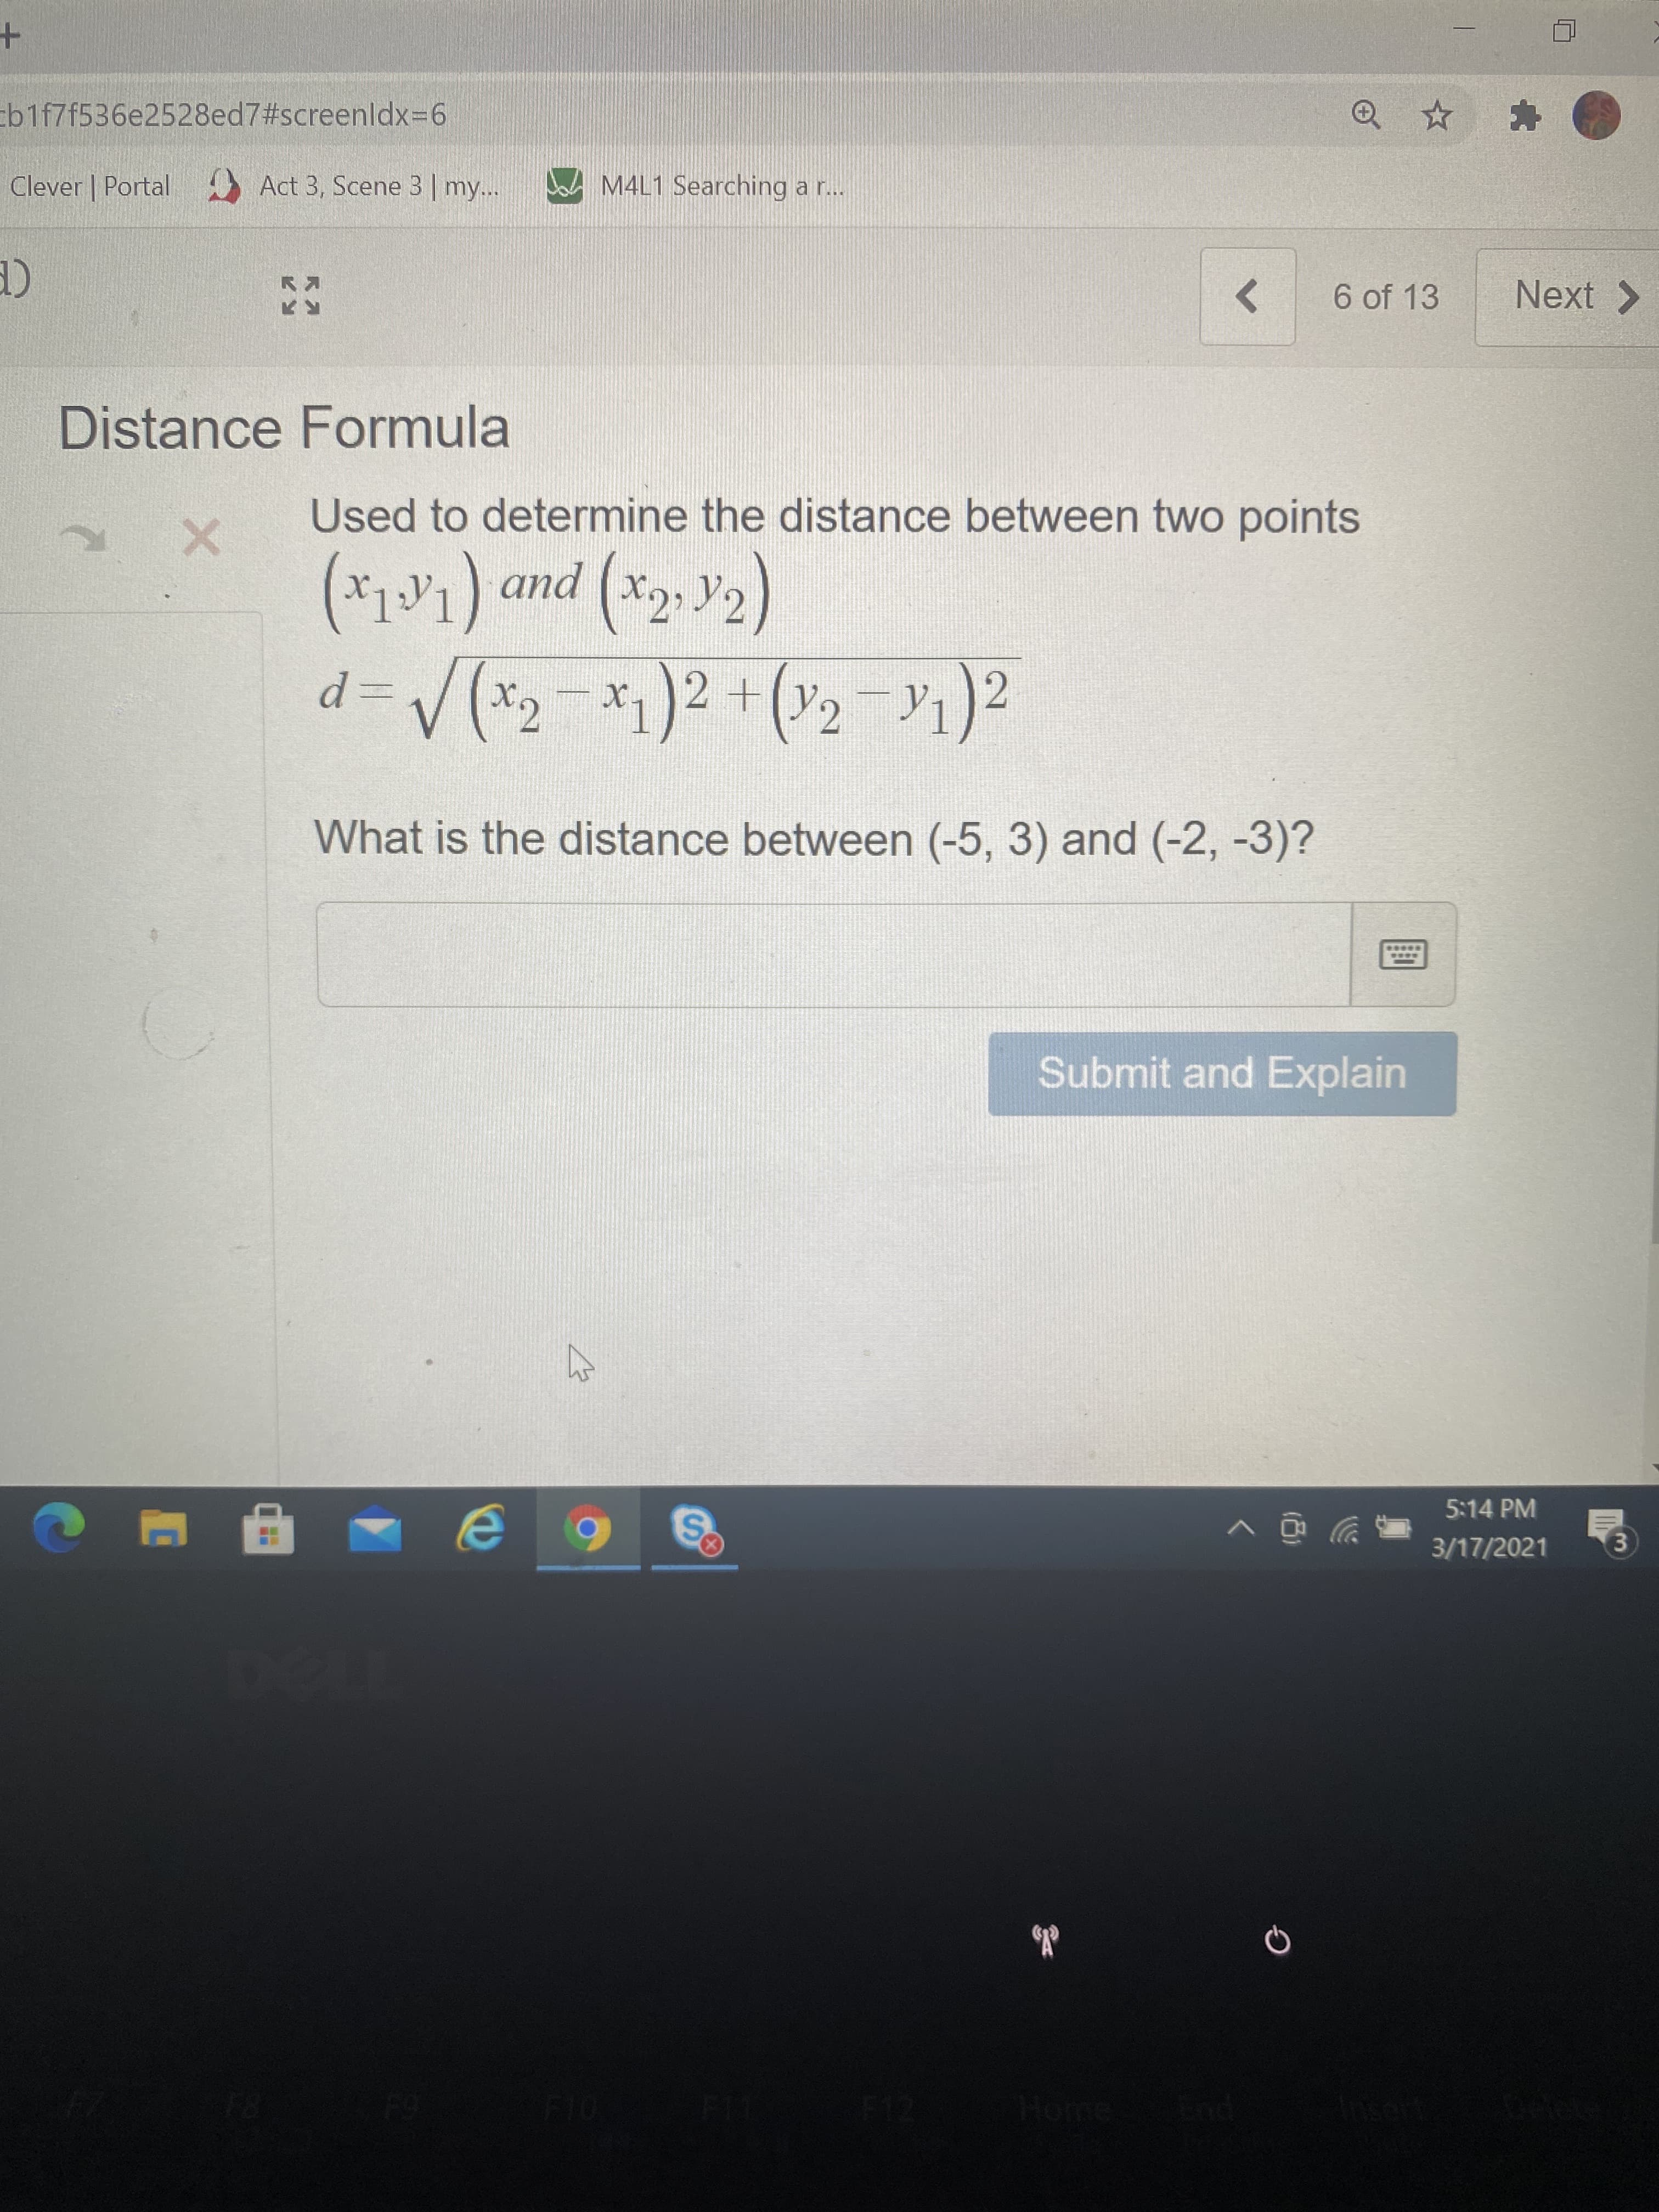 Used to determine the distance between two points
(*11) and (*, V2)
d= V(*-*)2 +(2 -1)2
and (X2
d%3D
What is the distance between (-5, 3) and (-2, -3)?
